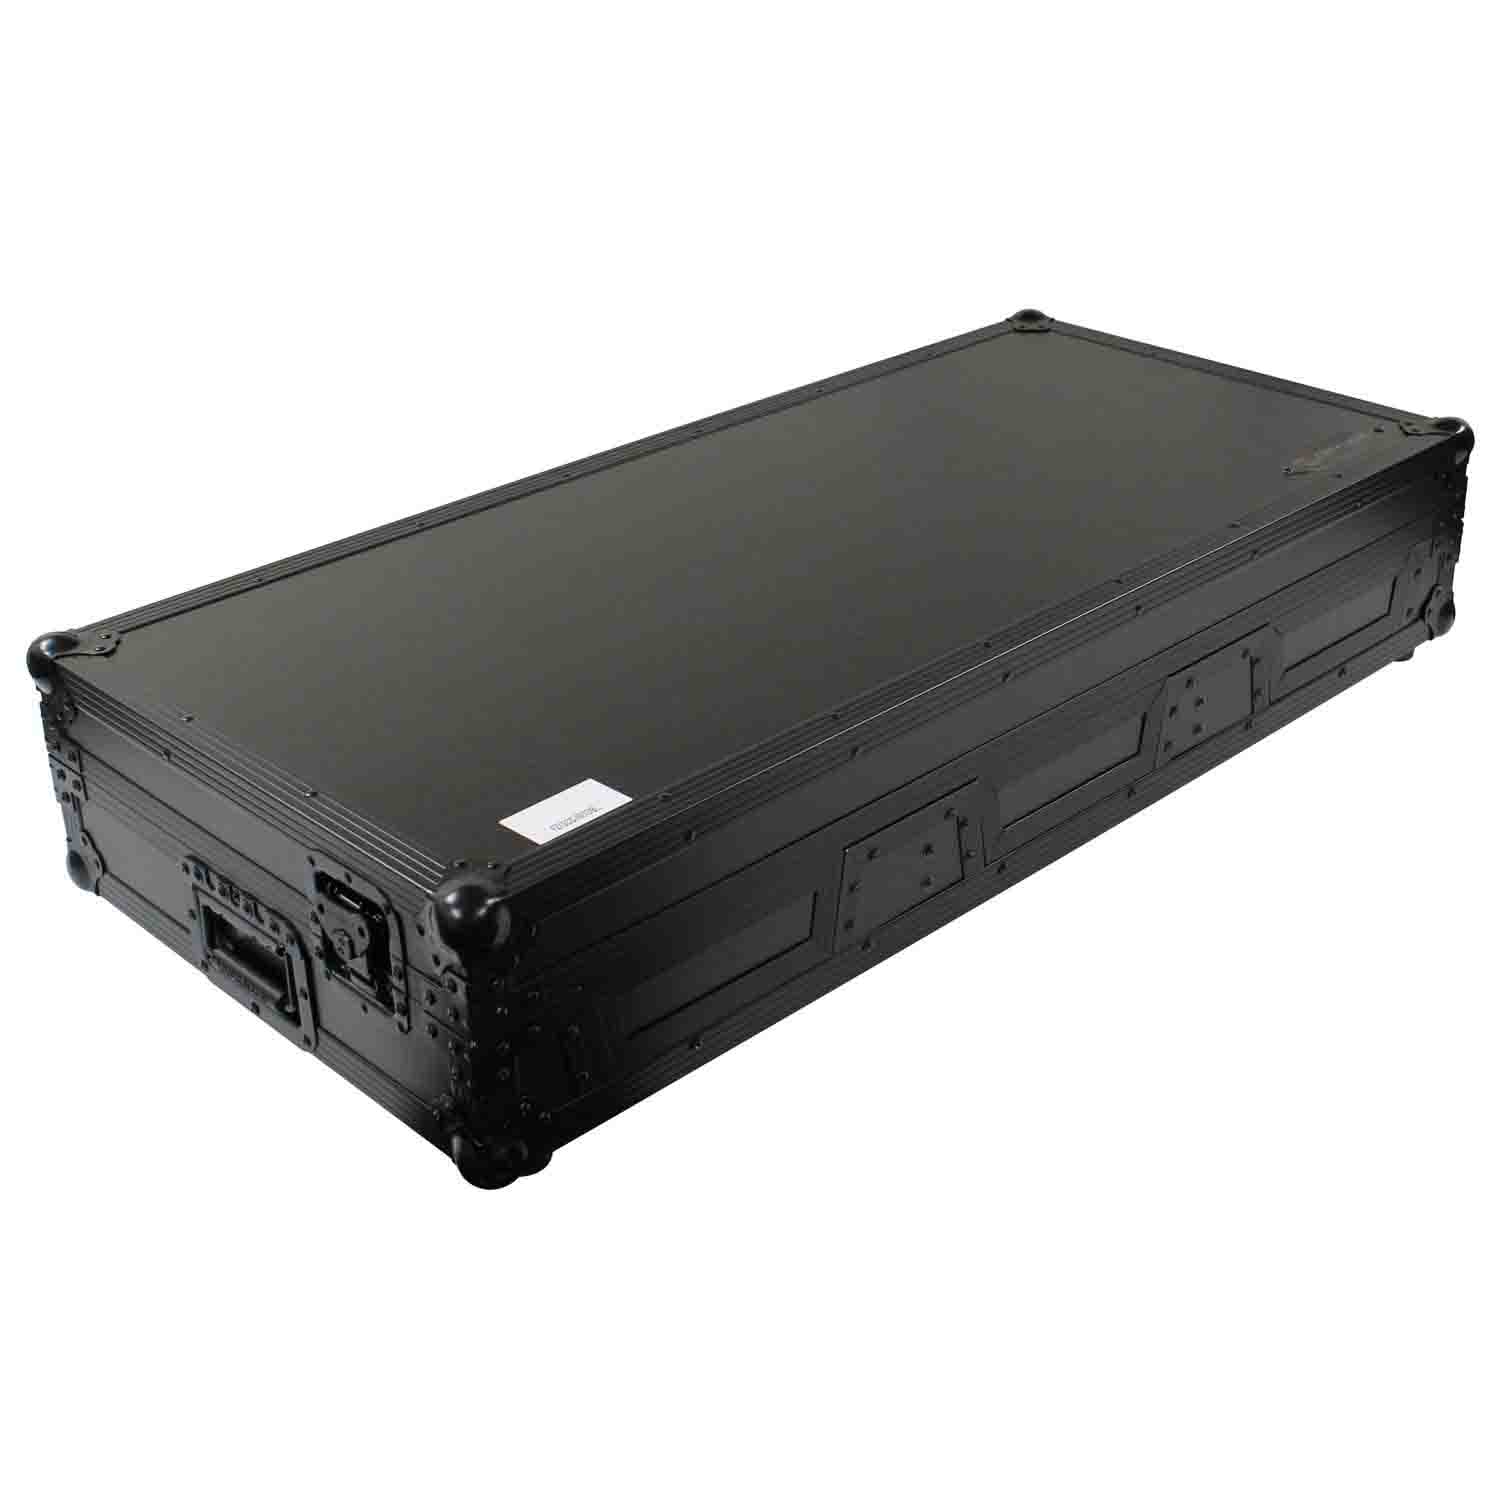 Odyssey FZ12CDJWXDBL Coffin Flight Case For 12″ Format DJ Mixer and Two Large Format Media Players - Black - Hollywood DJ